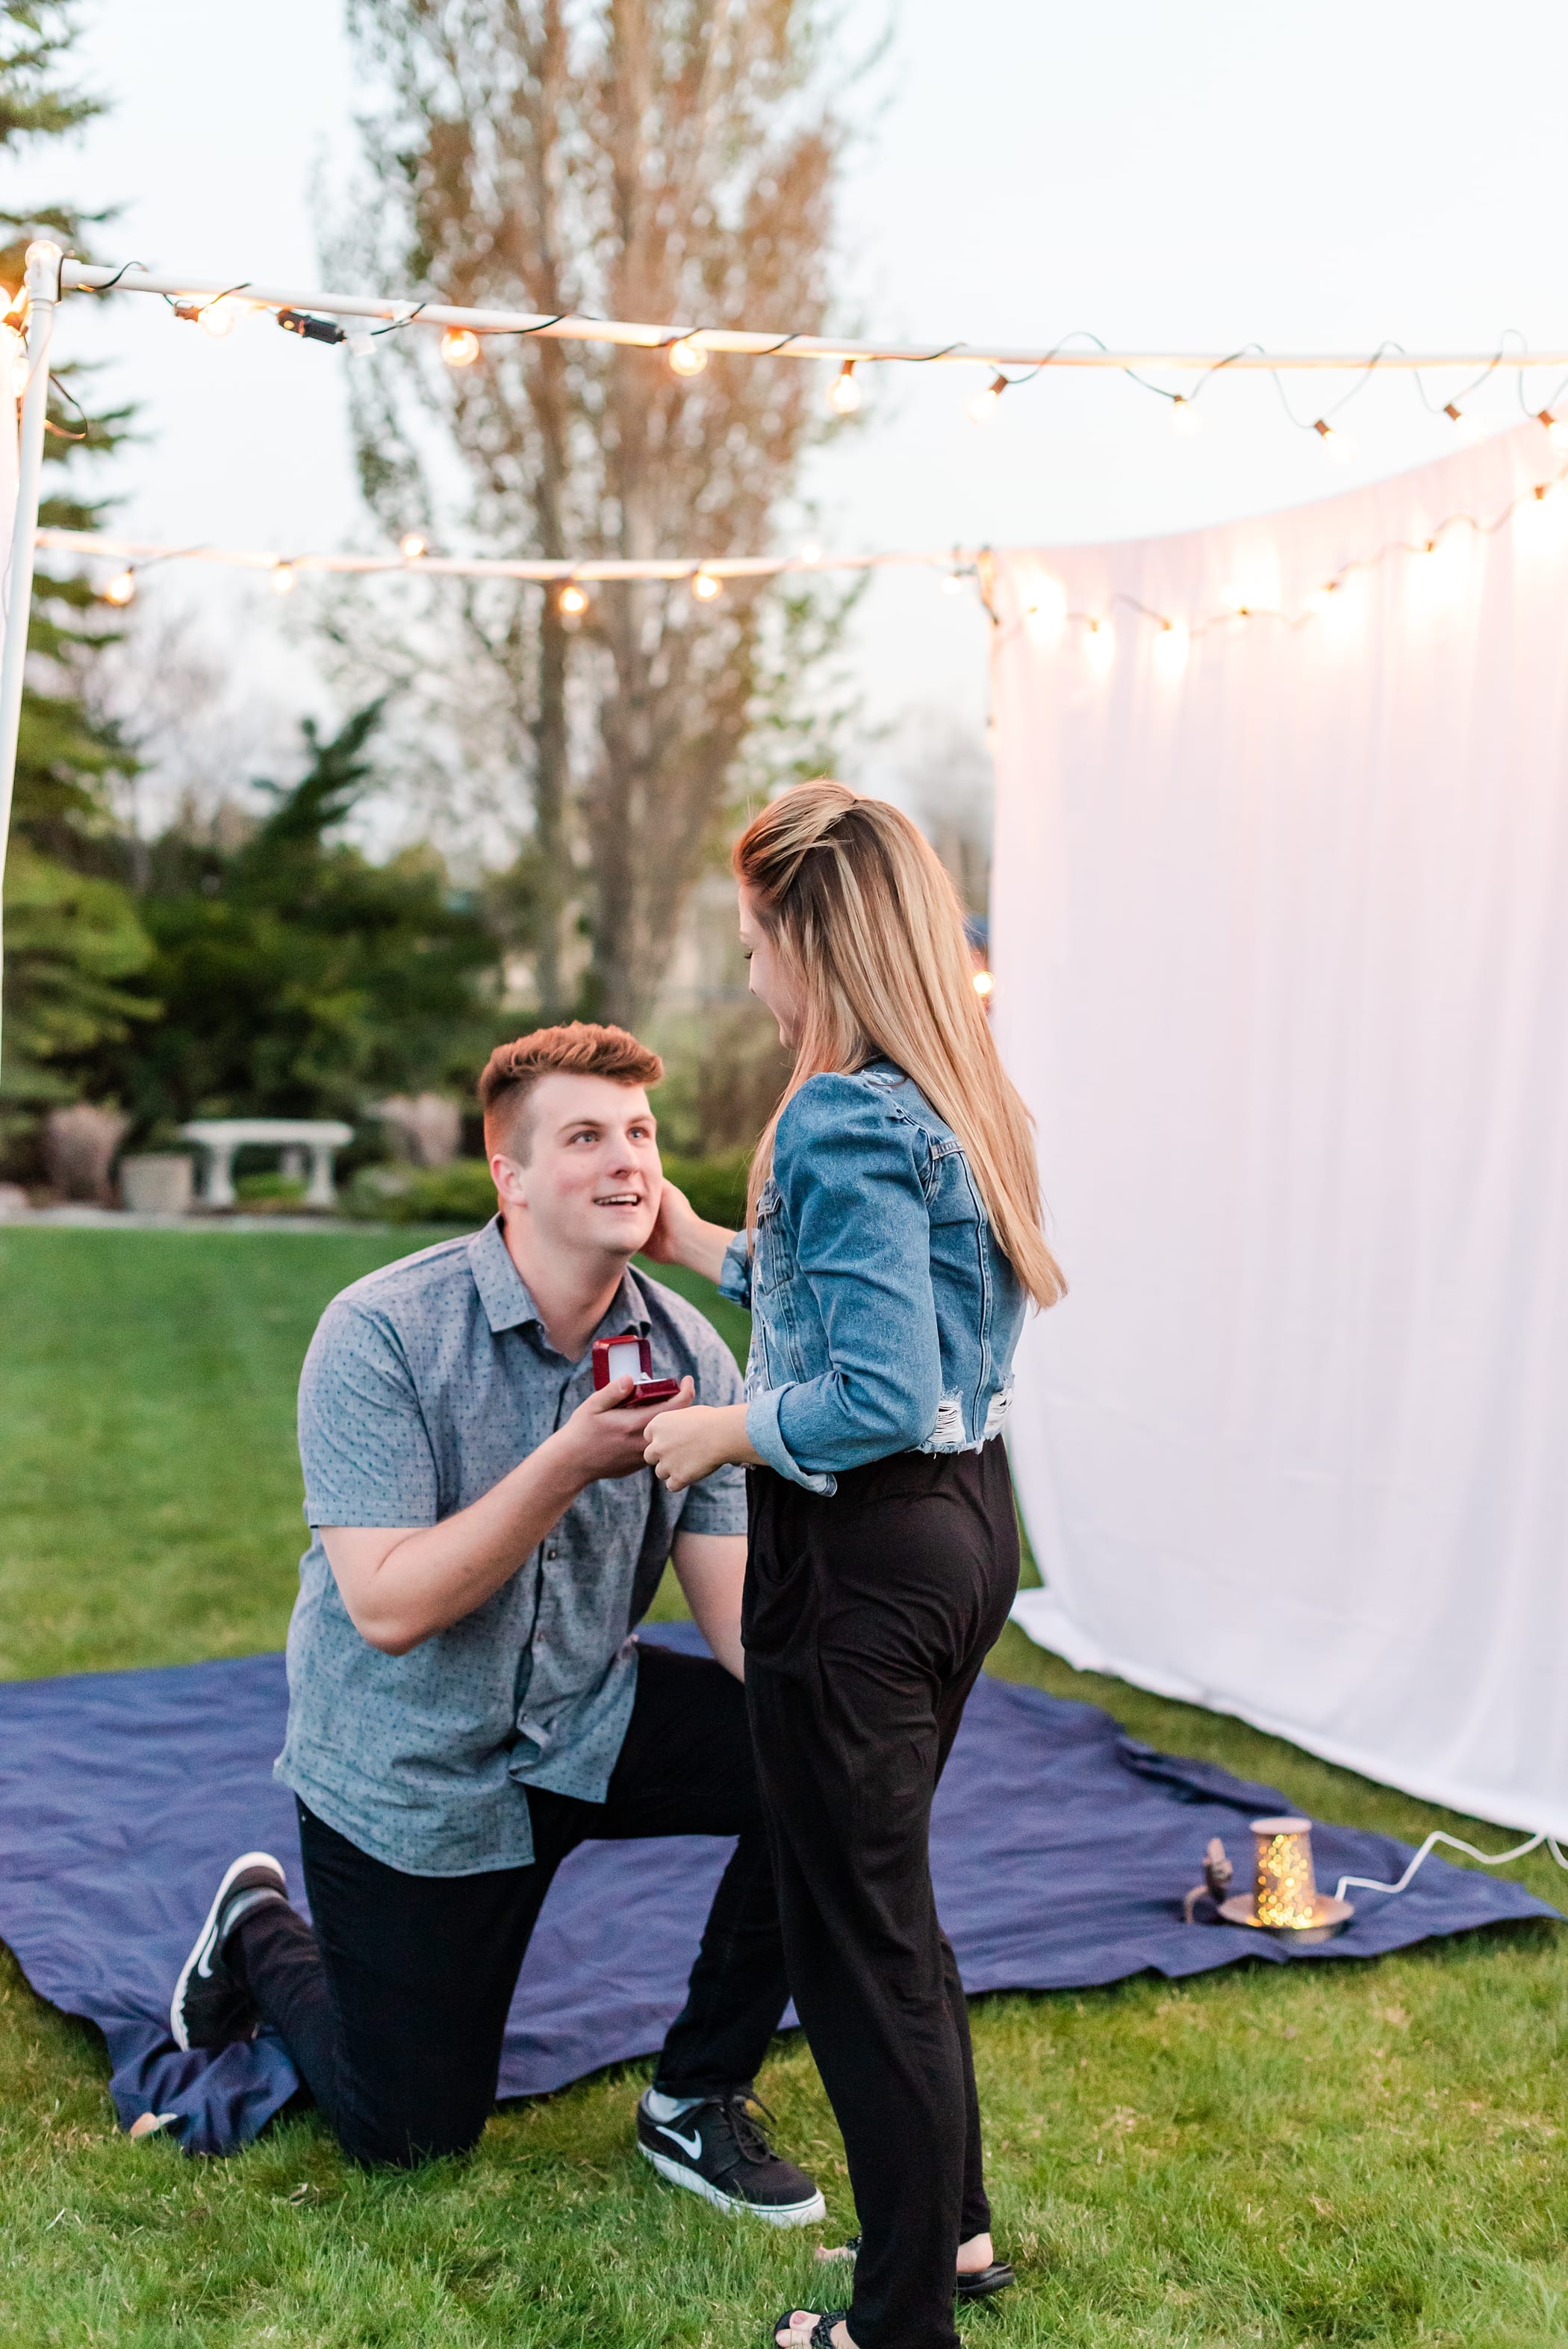 Greatest Showman inspired proposal photos